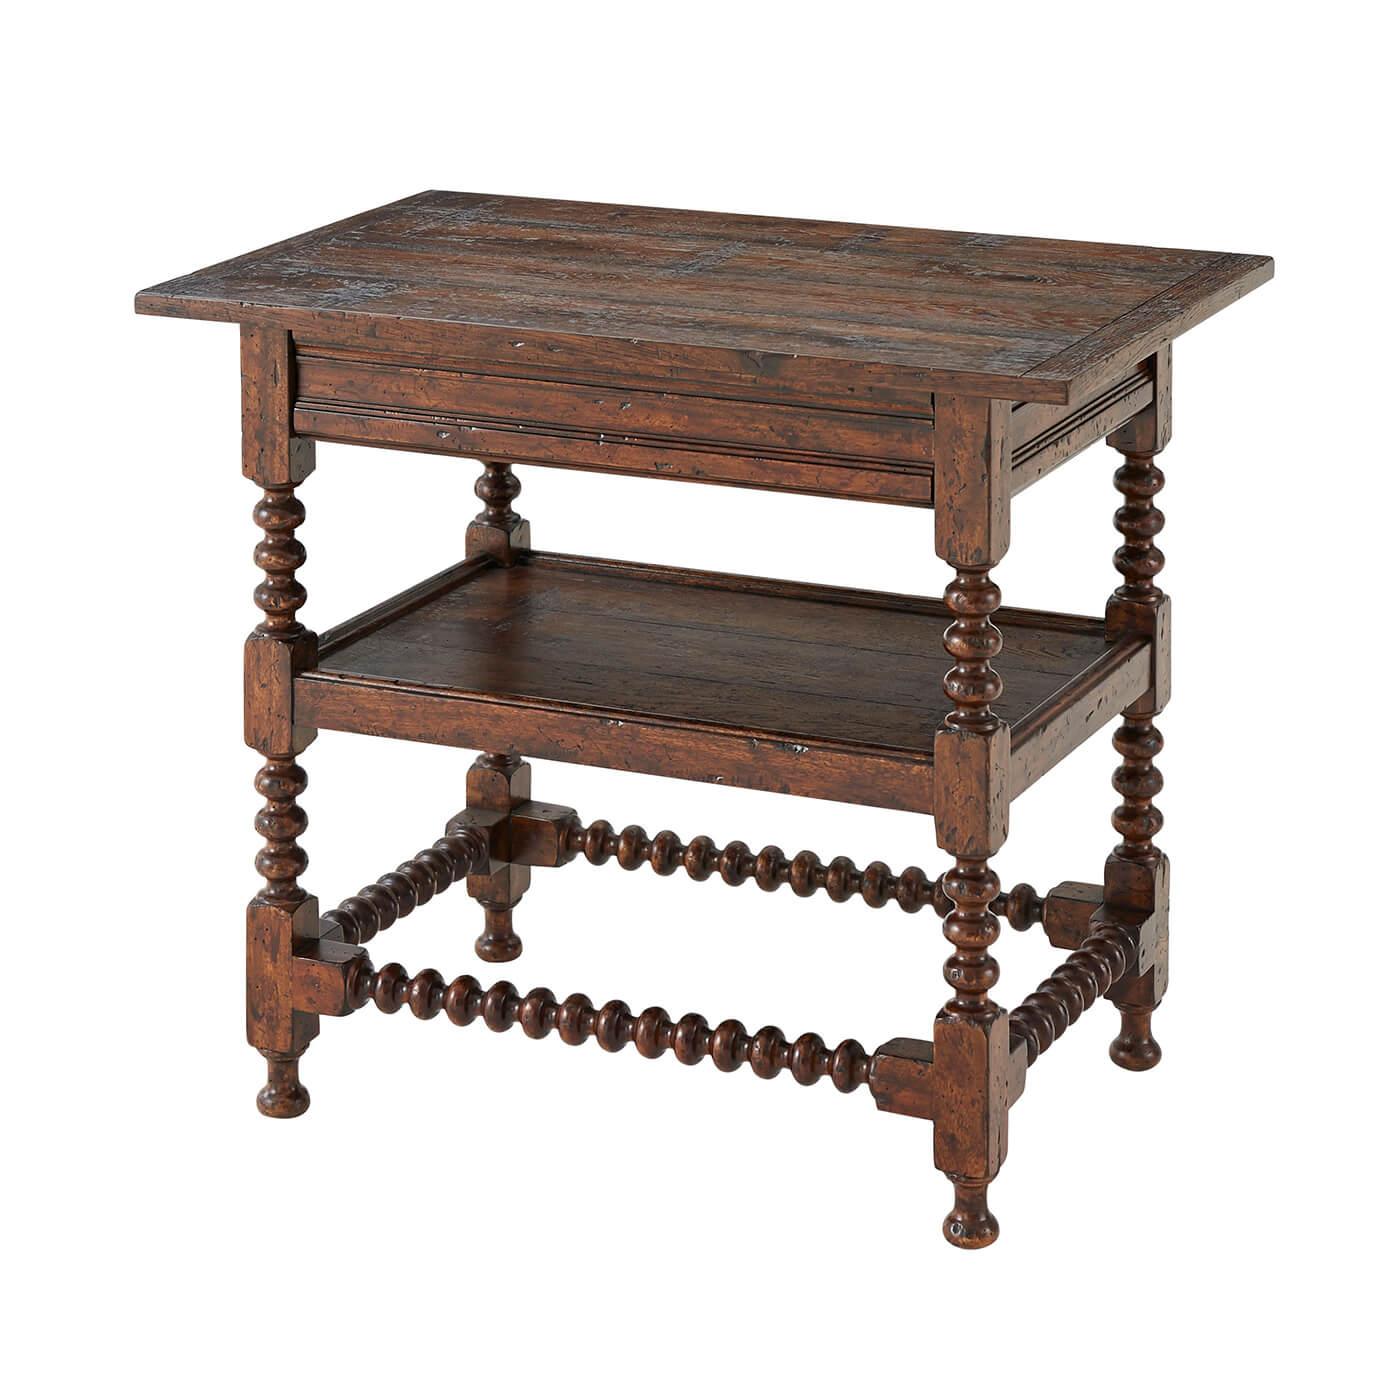 A Jacobean style rustic mahogany and reclaimed oak side table, the rectangular planked and breadboard top above a molded frieze, on bobbin turned and block legs joined by a boarded tier and bobbin stretchers below.

Dimensions: 31.5